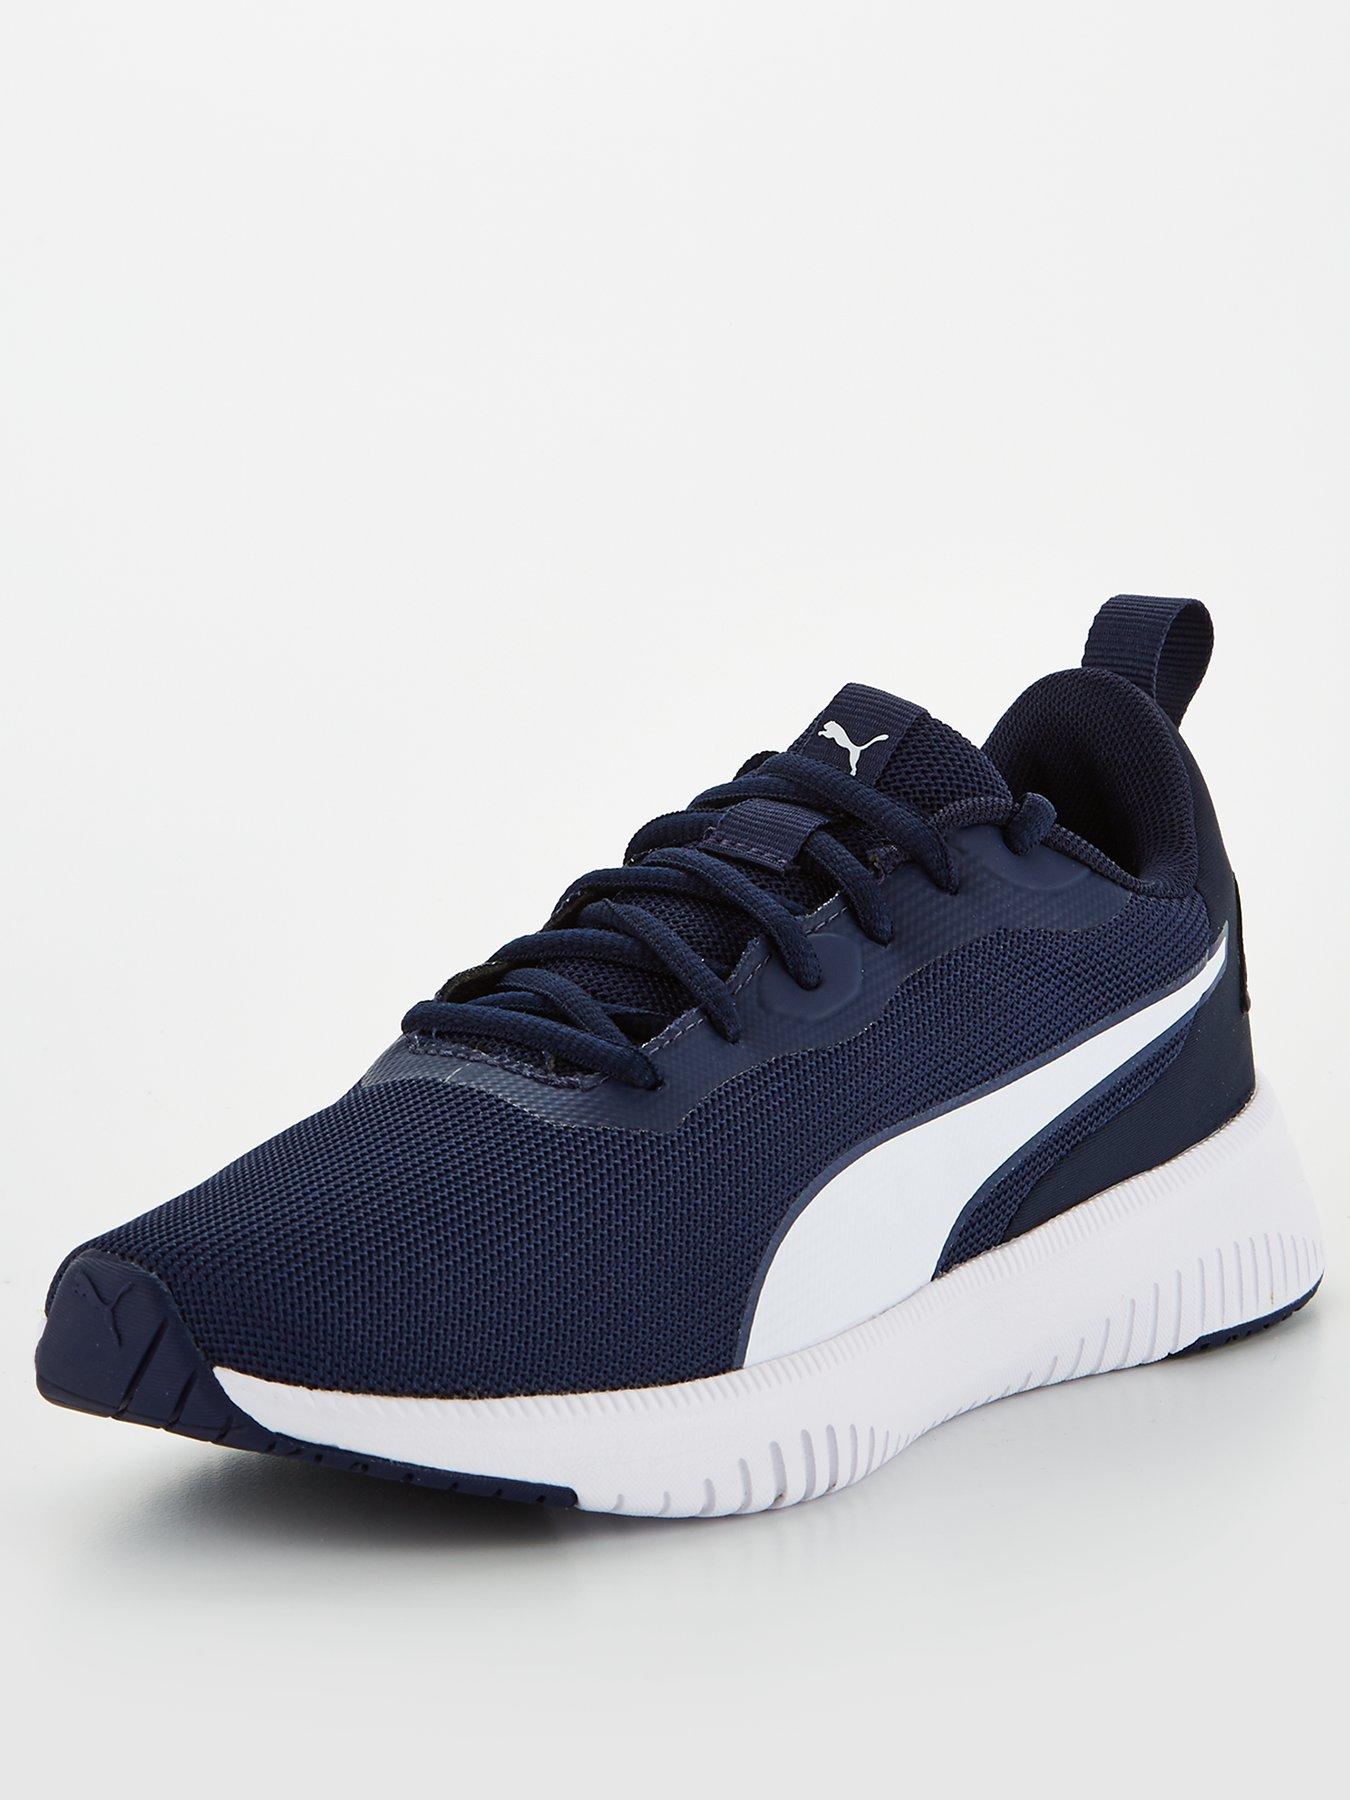 Carnicero blanco lechoso montar Puma Trainers | Puma Women's Trainers at Very.co.uk